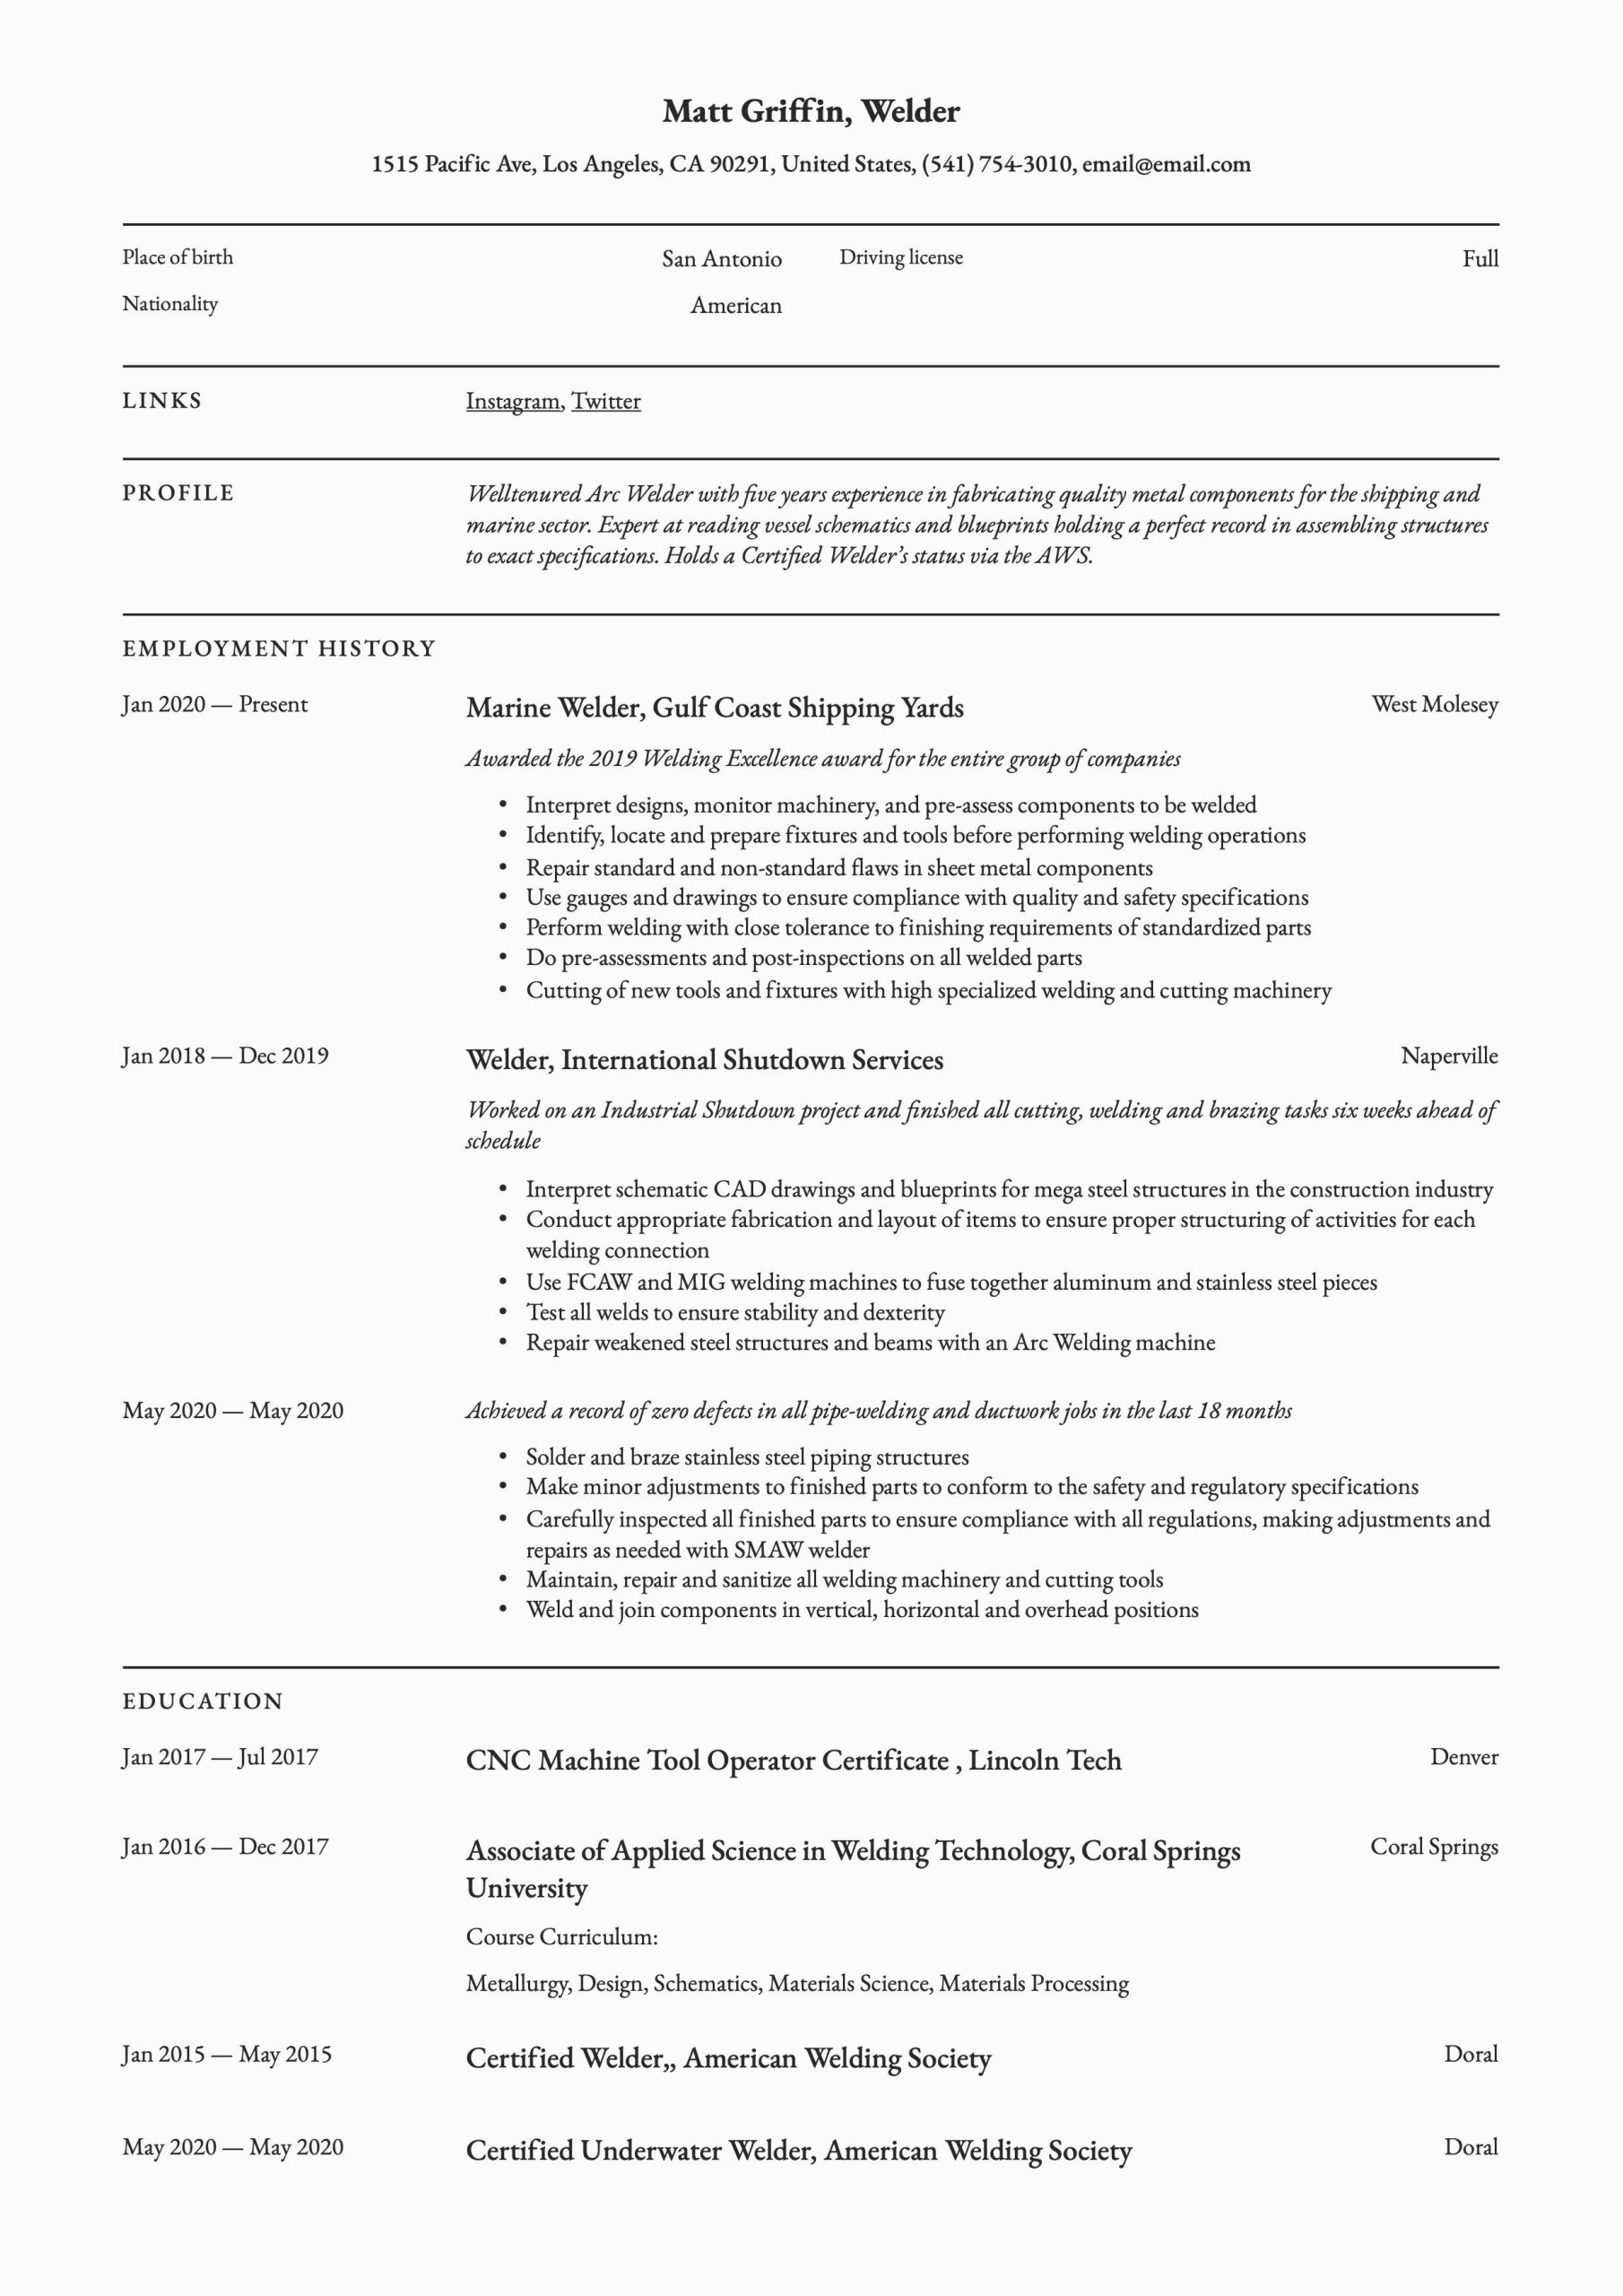 Samples Of Entry Level Welding Resumes Entry Level Welding Resume Templates Scrappycritter